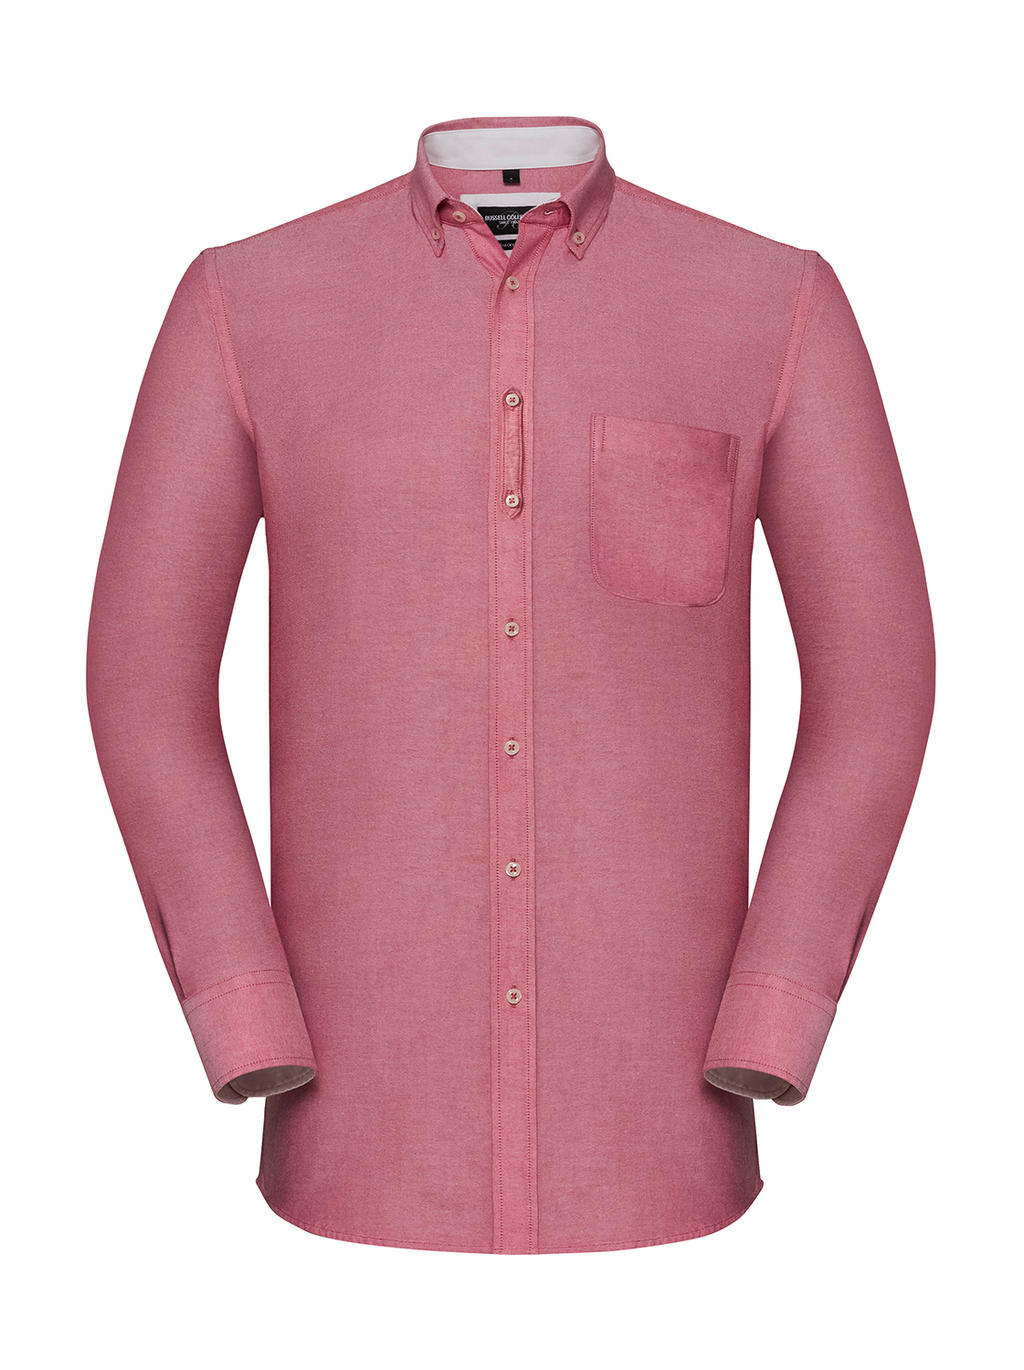  Mens LS Tailored Washed Oxford Shirt in Farbe Oxford Red/Cream